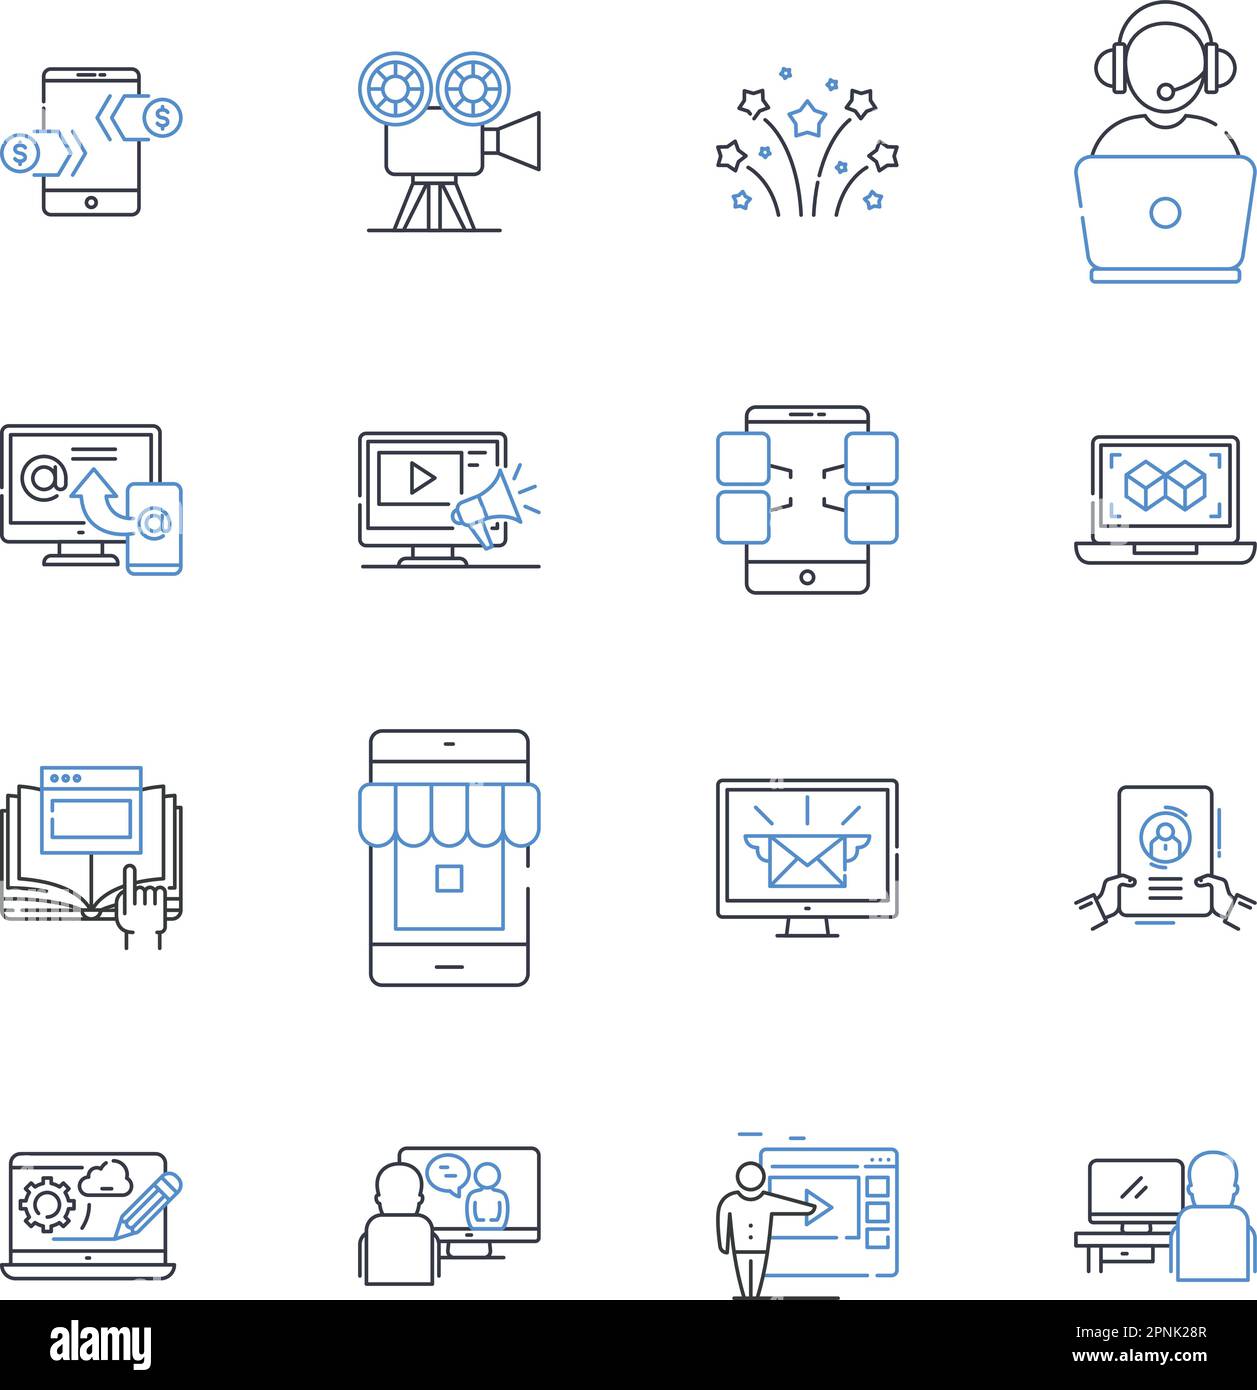 Mobile marketing line icons collection. SMS, QR Codes, Location-based, Apps, Responsive, Targeted, Engagement vector and linear illustration. Push Stock Vector